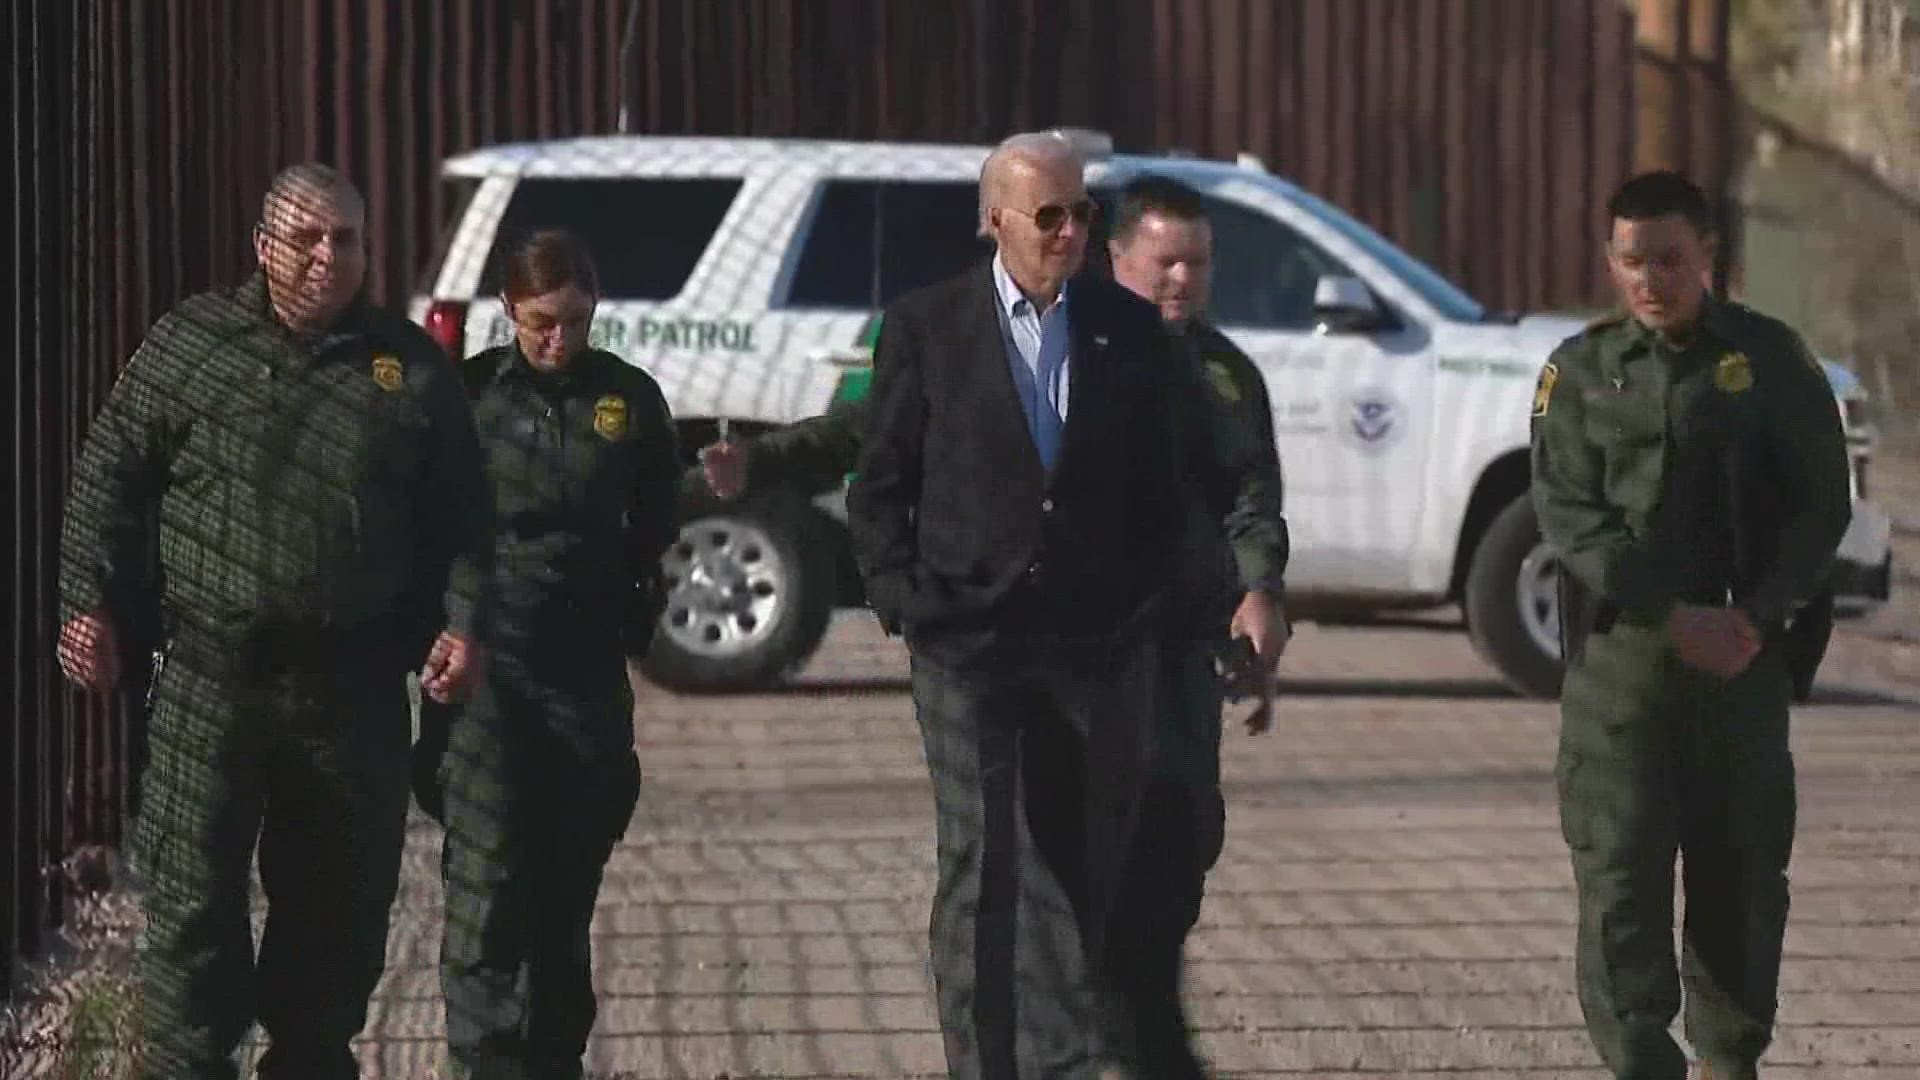 President Biden is in Mexico for his first North American Leader's Summit. NBC's Drew Petrimoulx reports.